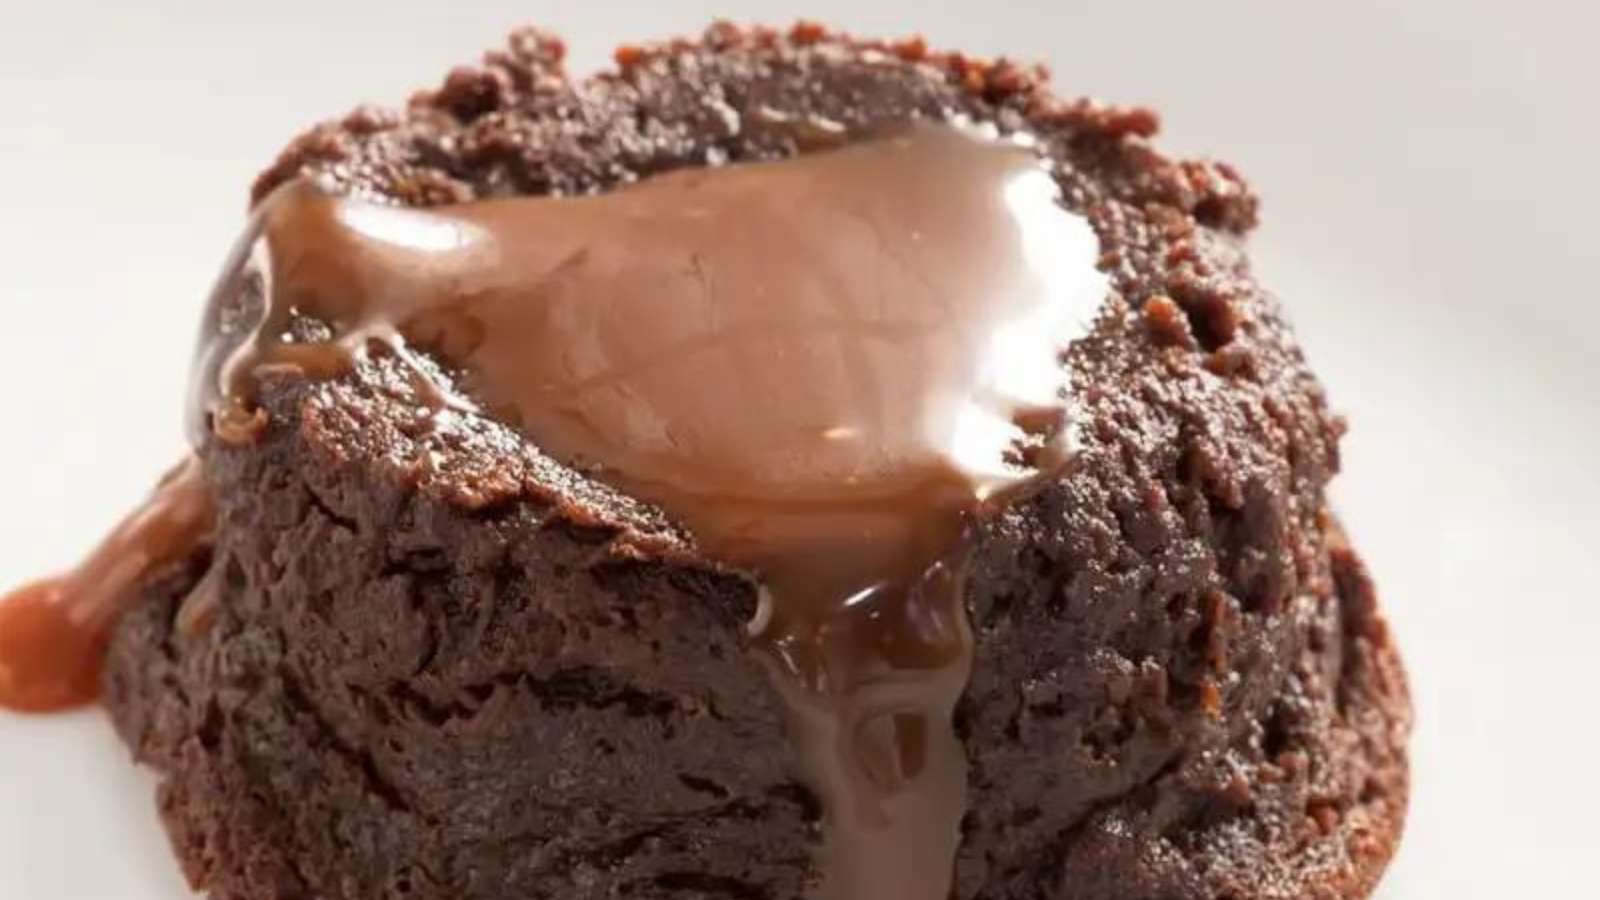 A decadent chocolate pudding drizzled with rich chocolate sauce.